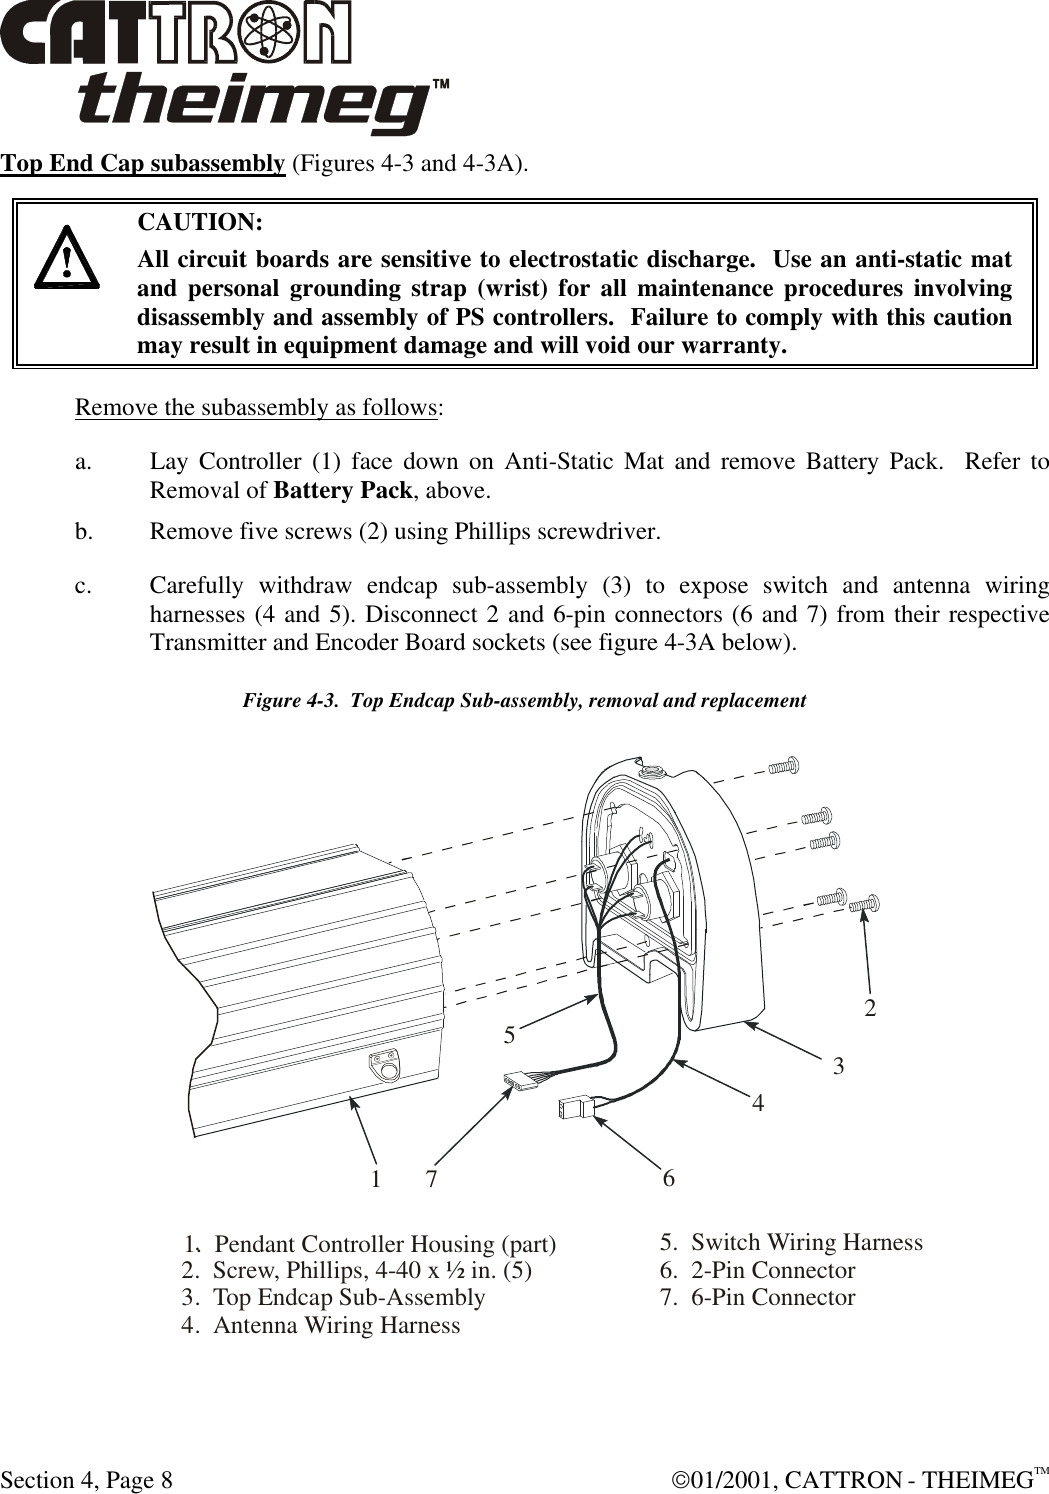  Section 4, Page 8  01/2001, CATTRON - THEIMEGTM Top End Cap subassembly (Figures 4-3 and 4-3A).     CAUTION: All circuit boards are sensitive to electrostatic discharge.  Use an anti-static mat and personal grounding strap (wrist) for all maintenance procedures involving disassembly and assembly of PS controllers.  Failure to comply with this caution may result in equipment damage and will void our warranty.  Remove the subassembly as follows: a. Lay Controller (1) face down on Anti-Static Mat and remove Battery Pack.  Refer to Removal of Battery Pack, above. b. Remove five screws (2) using Phillips screwdriver. c. Carefully withdraw endcap sub-assembly (3) to expose switch and antenna wiring harnesses (4 and 5). Disconnect 2 and 6-pin connectors (6 and 7) from their respective Transmitter and Encoder Board sockets (see figure 4-3A below). Figure 4-3.  Top Endcap Sub-assembly, removal and replacement 71.  1.  Pendant Controller Housing (part)2.  Screw , Phillips, 4-40 x ½ in. (5)3.  Top Endcap Sub-Assembly4.  A ntenna W iring H arness5.  Sw itch W iring H arness6.  2-Pin C onnector7.  6-Pin C onnector23465